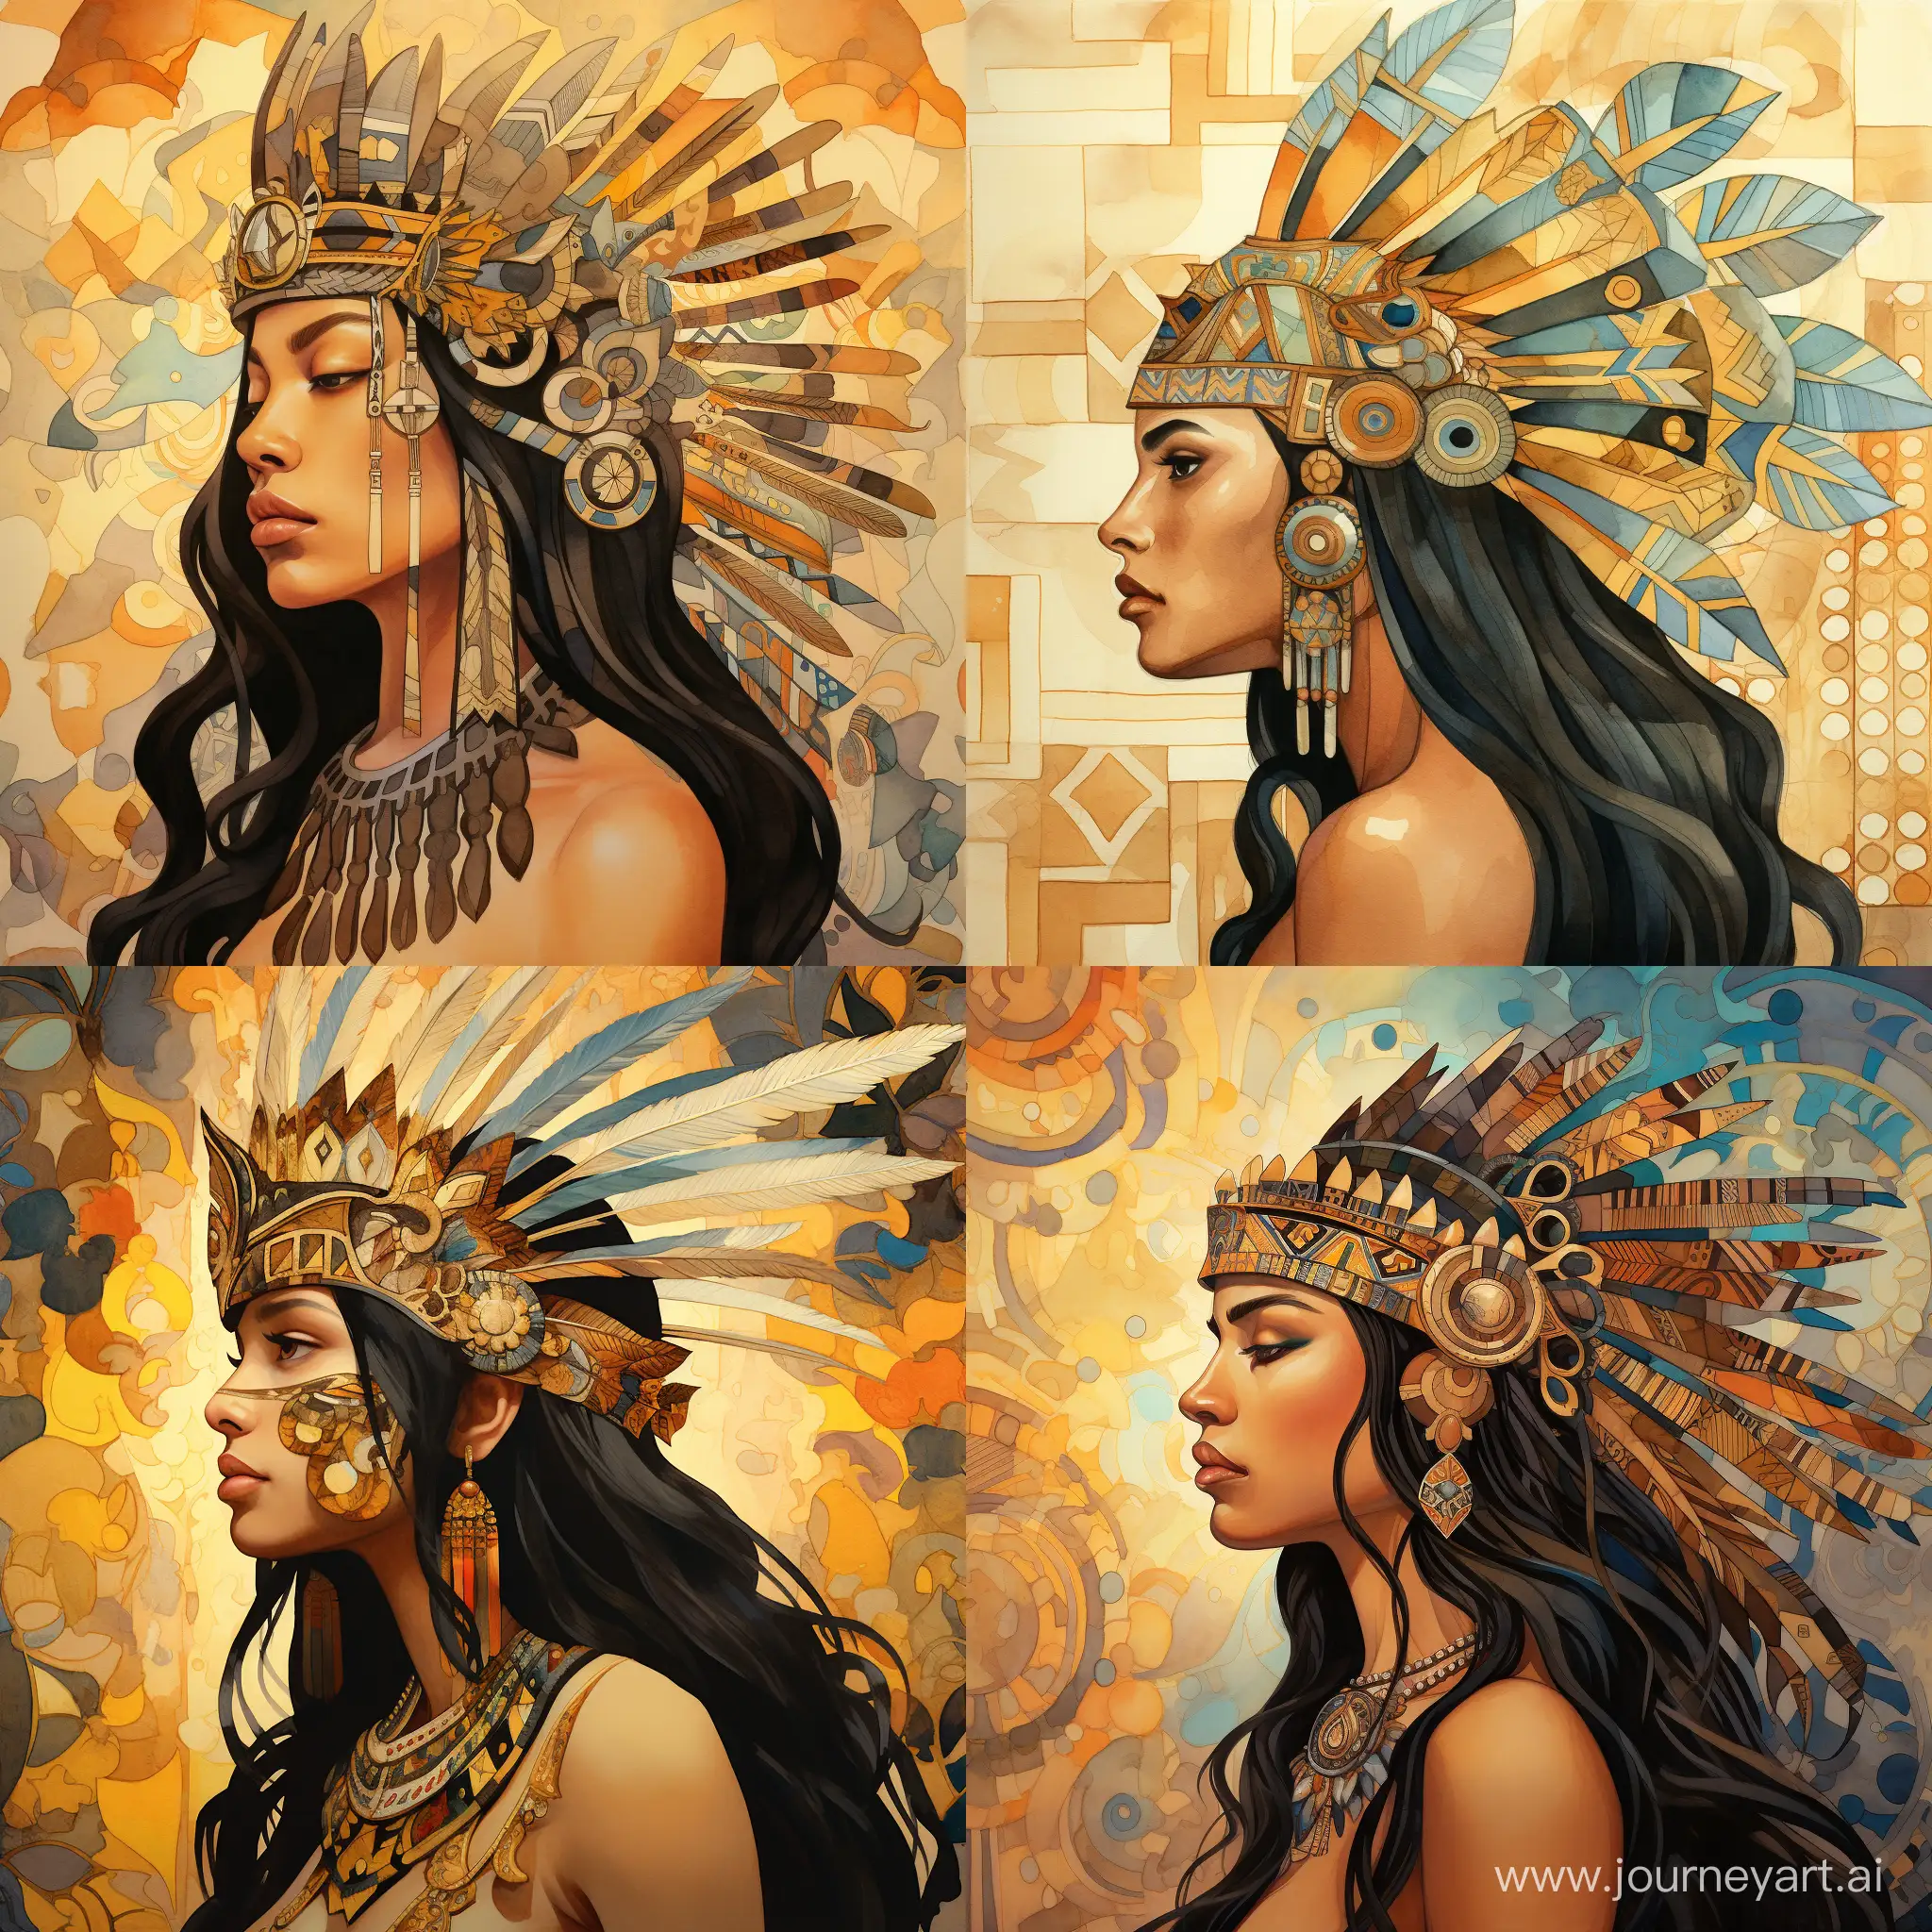 In a golden crown, black-haired woman, Indian, in profile, portrait, Aztec civilization, against a pattern of clubs, fairy tale illustration, stylized caricature, Victor Ngai, watercolor, drawing, decorative, flat drawing.